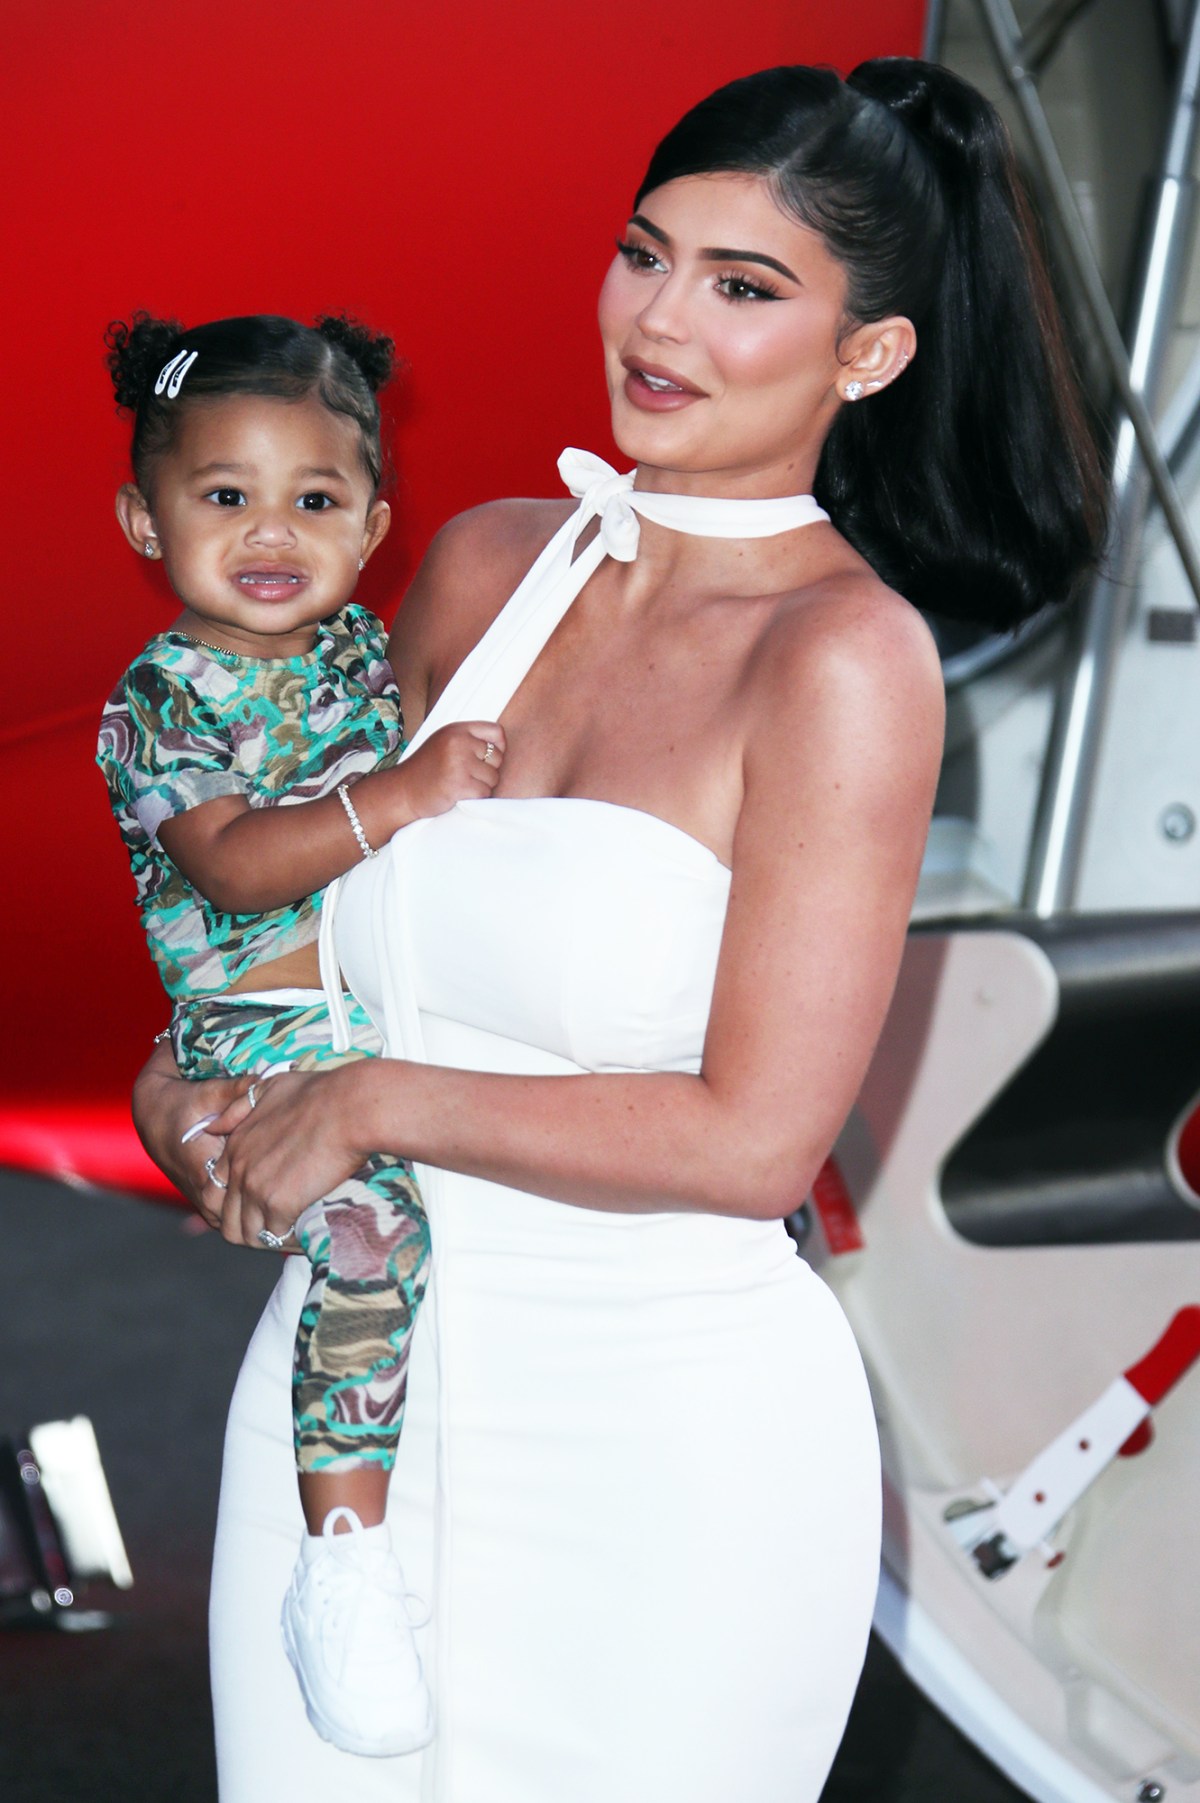 Kylie Jenner Shares Cute Video Of Stormi Webster On A Snowboard